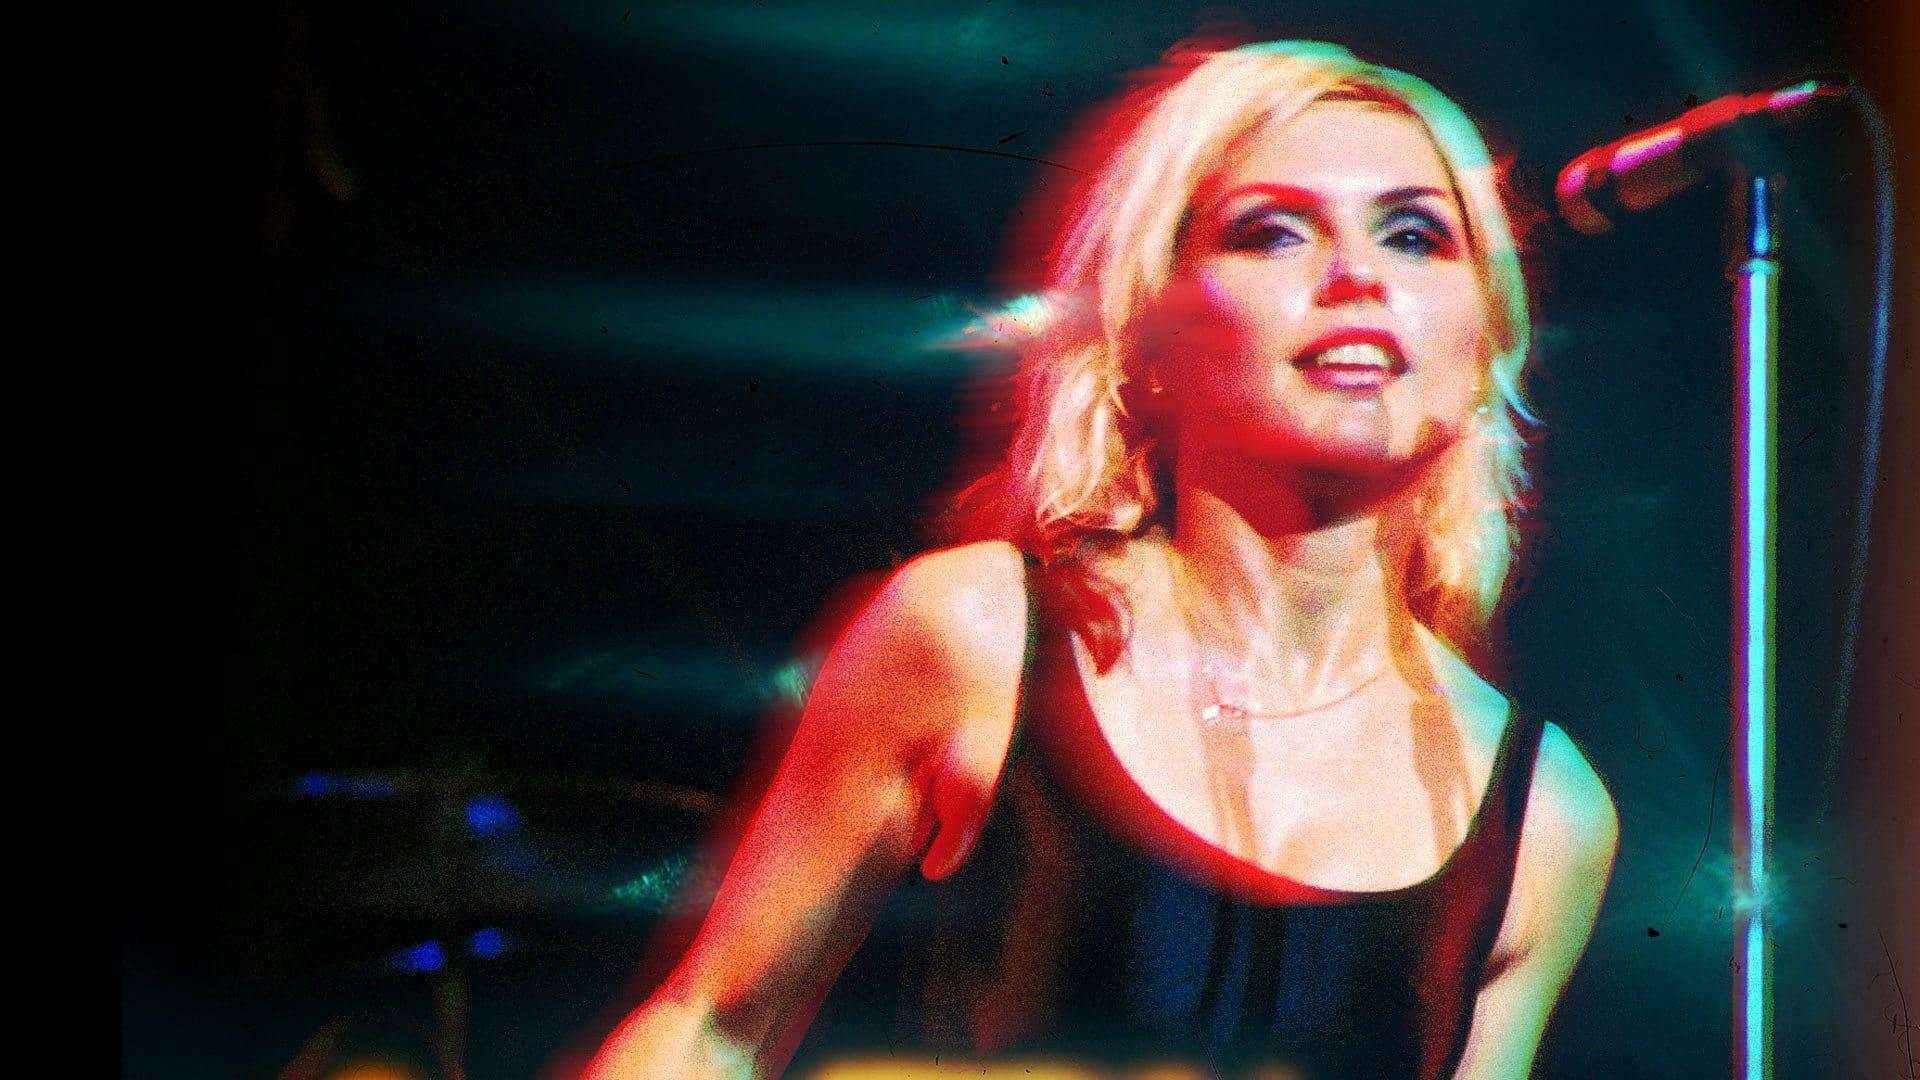 Blondie at the BBC backdrop